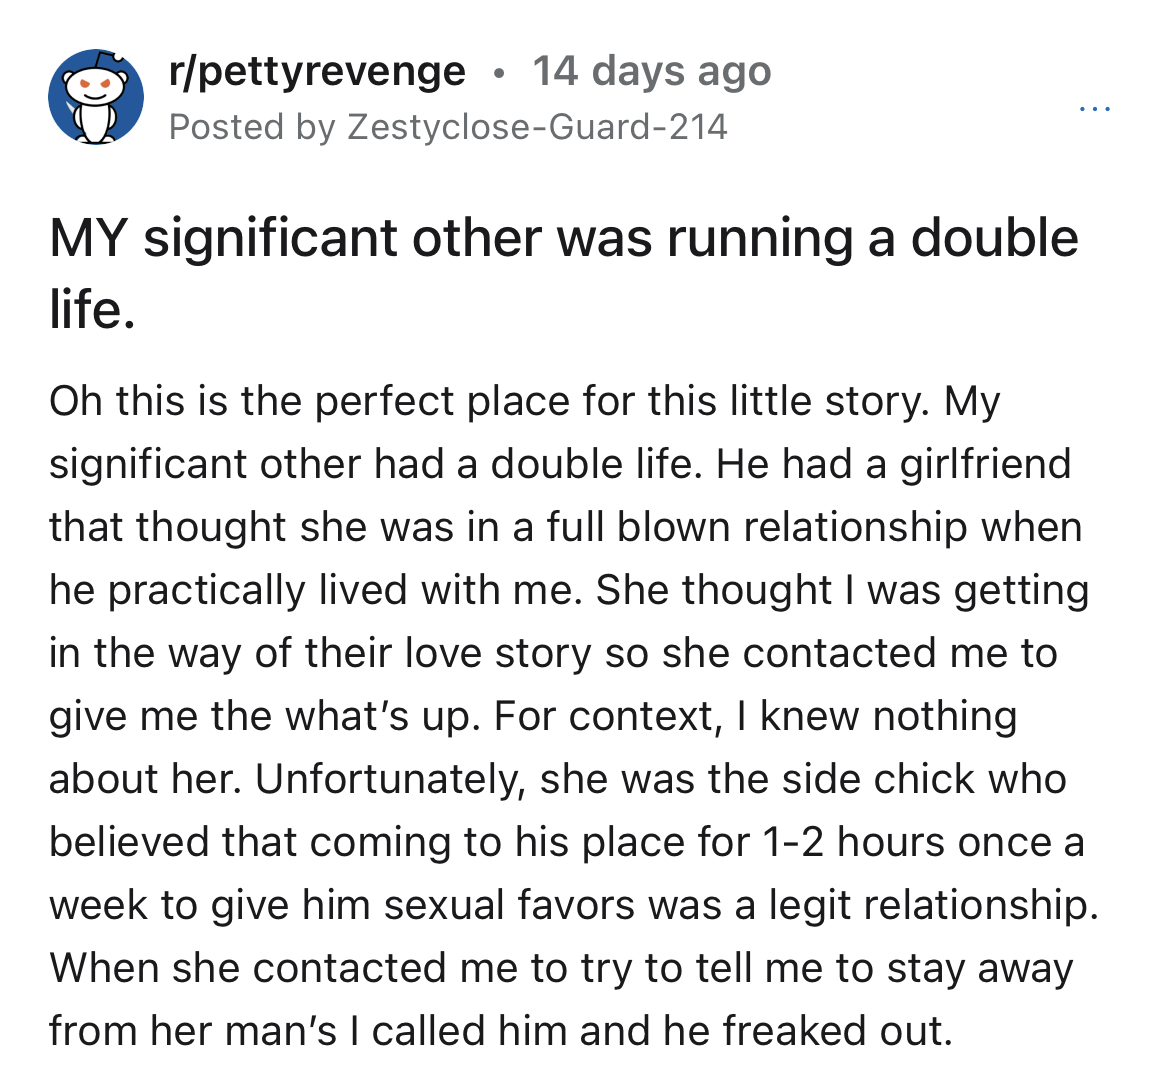 Cheater leading double life gets karma - document - rpettyrevenge. 14 days ago Posted by ZestycloseGuard214 My significant other was running a double life. Oh this is the perfect place for this little story. My significant other had a double life. He had 